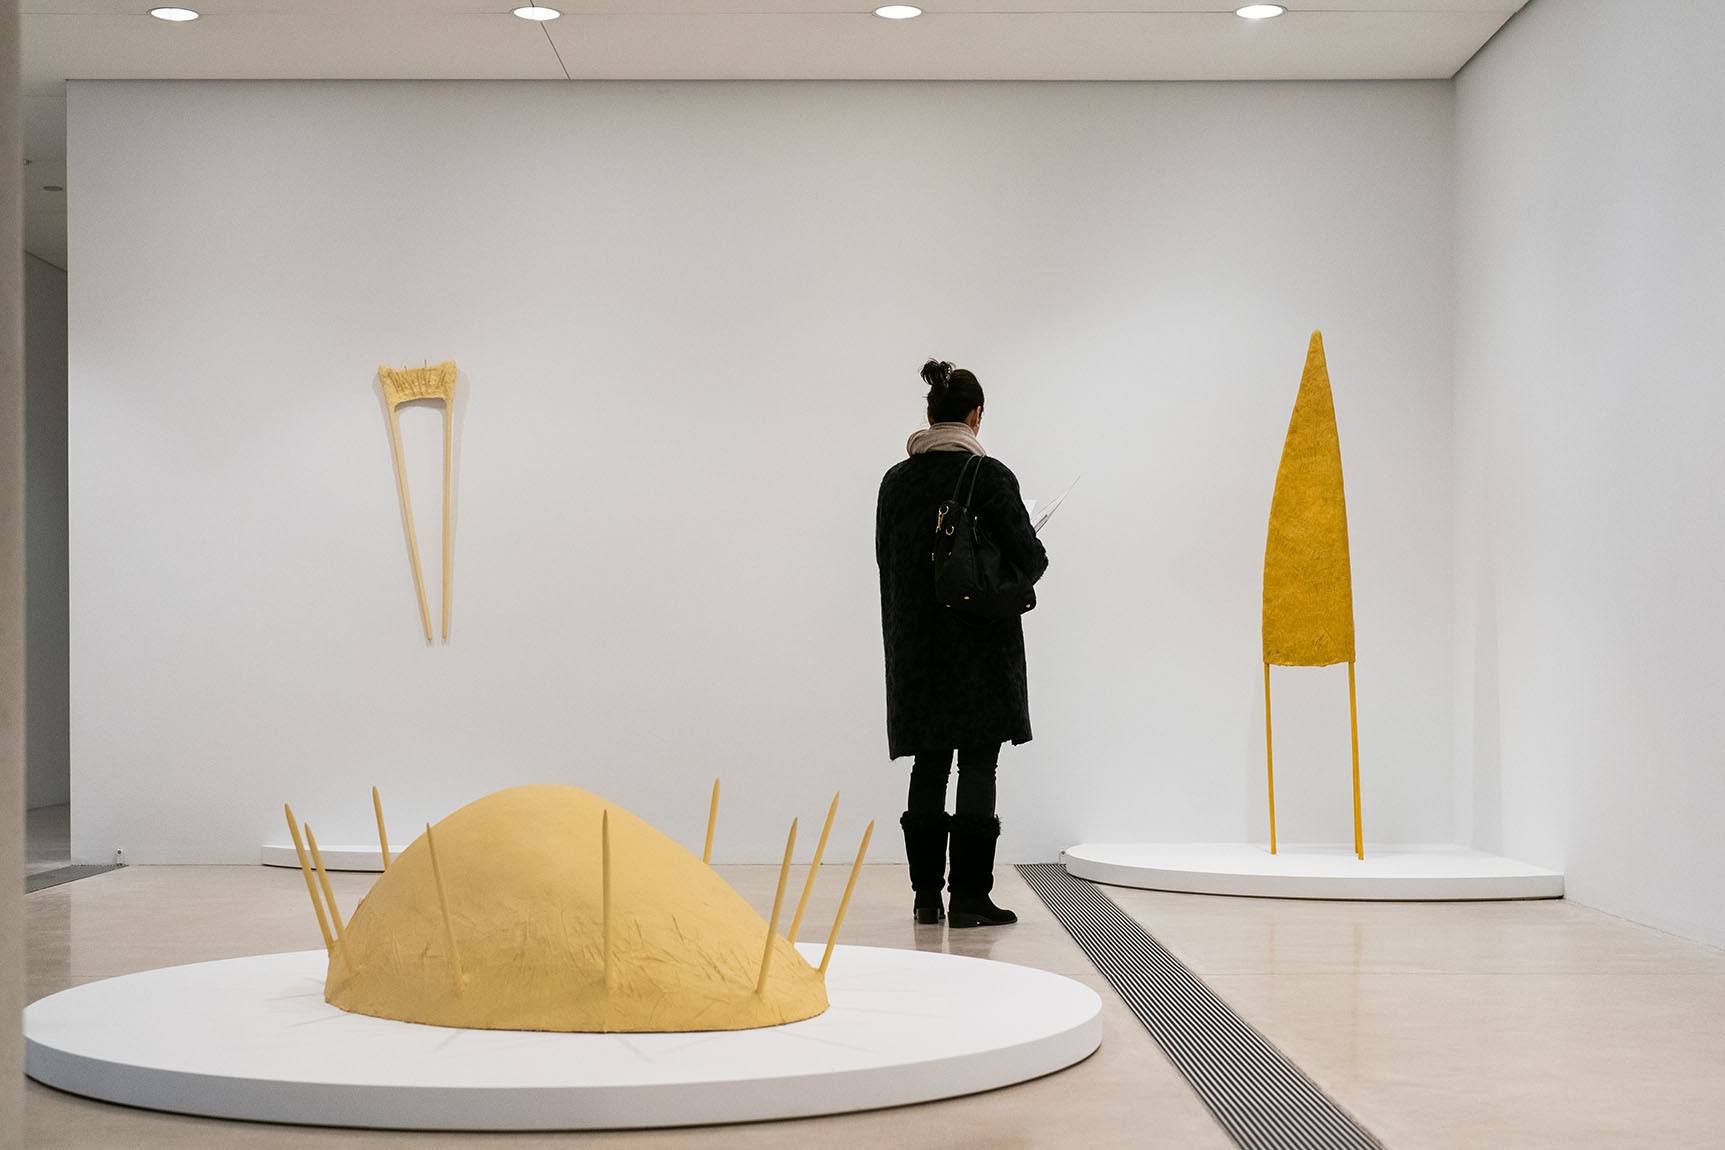 Person looking at yellow cone shaped sculpture with 3 legs